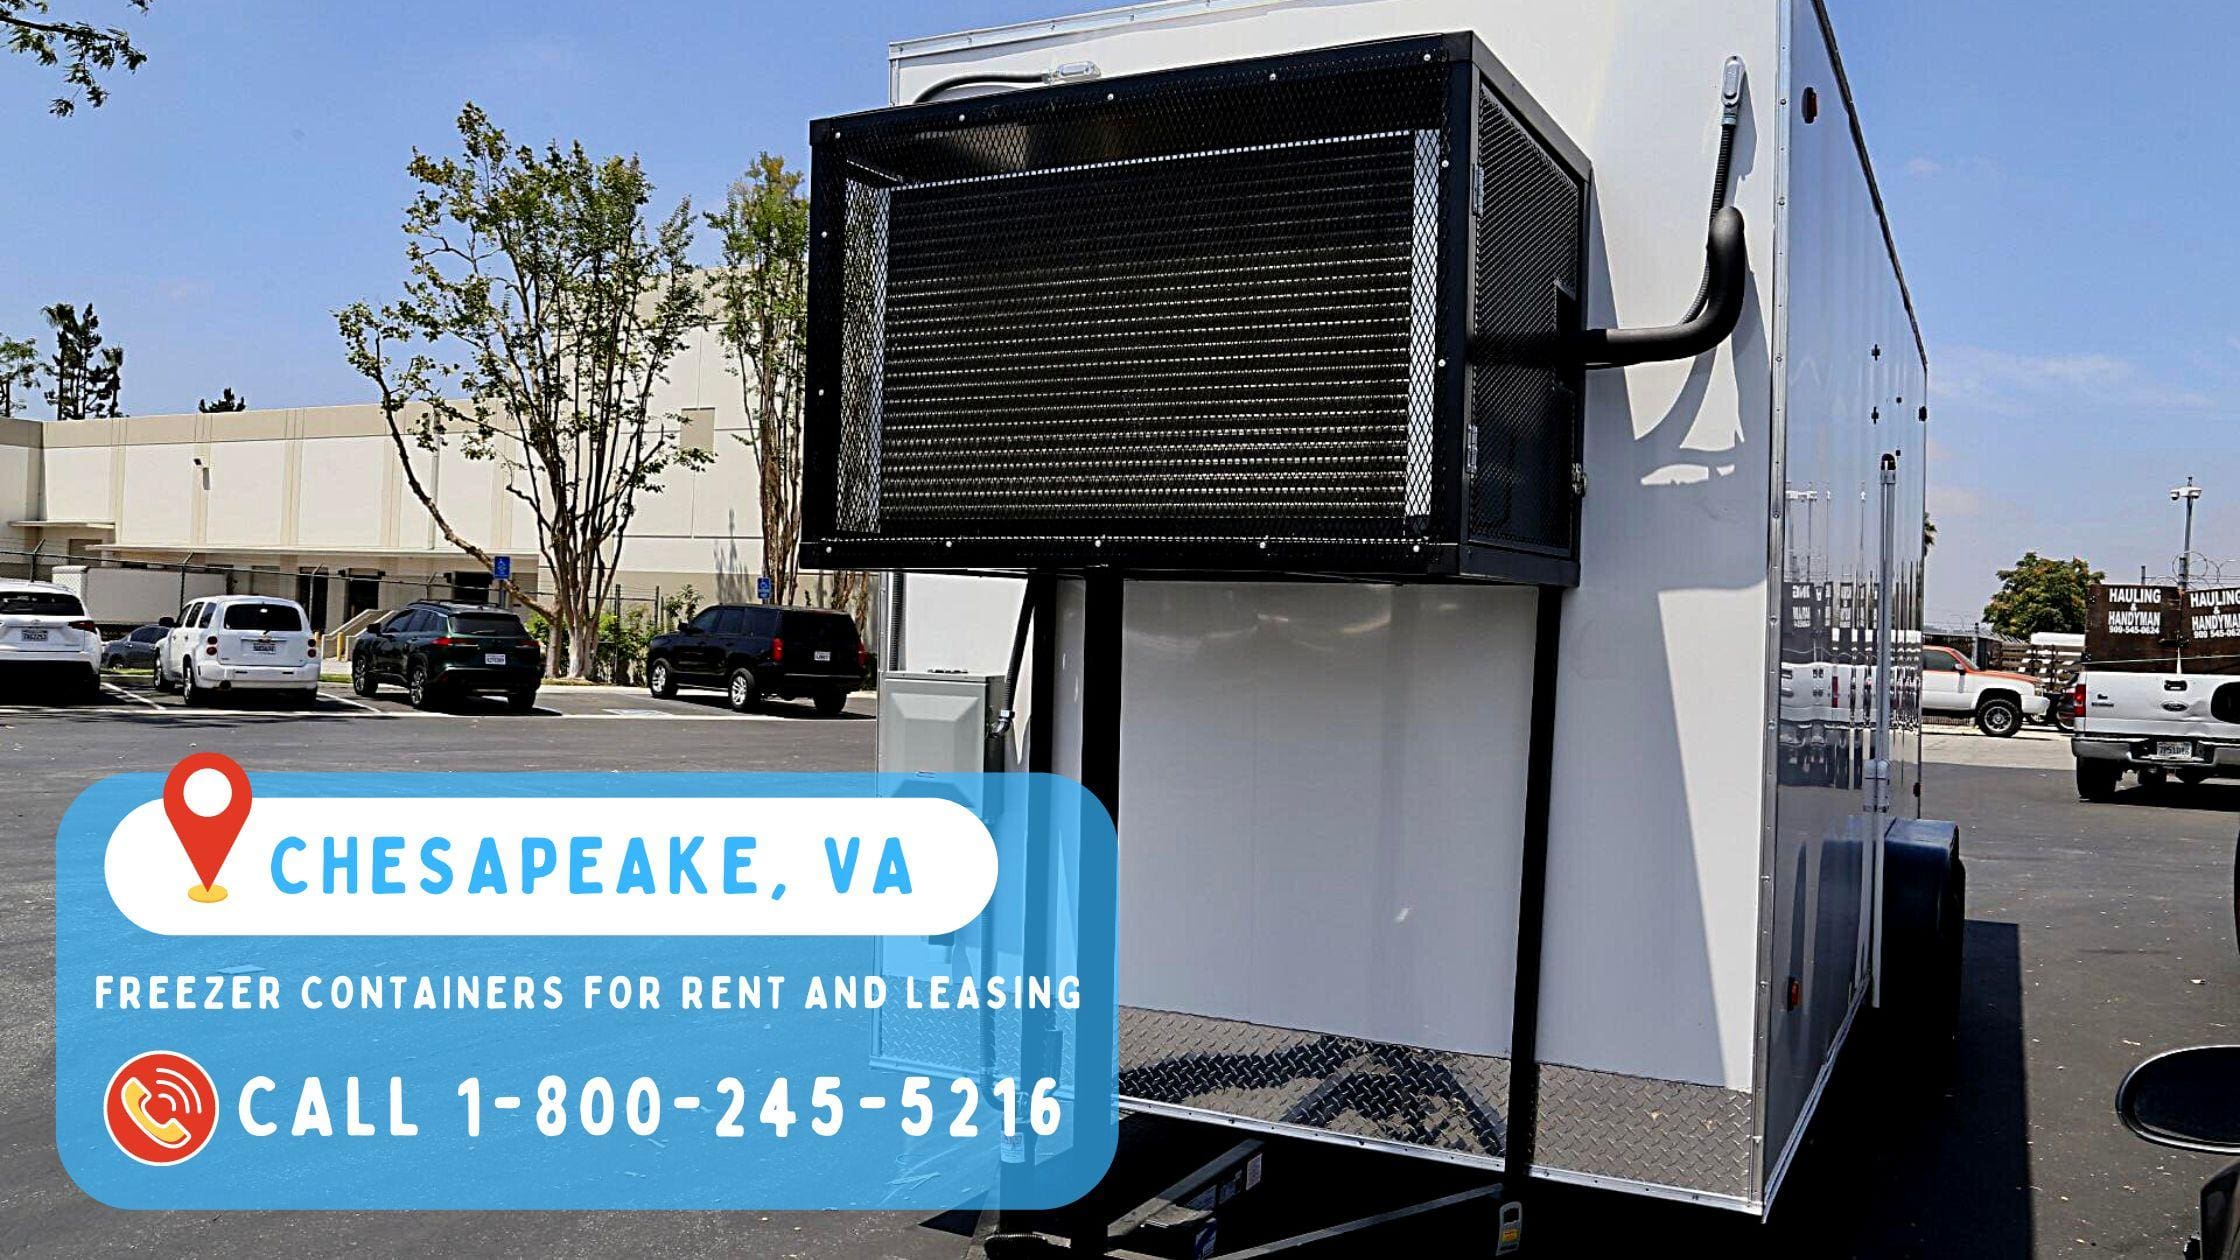 Freezer Containers for rent and leasing in Chesapeake